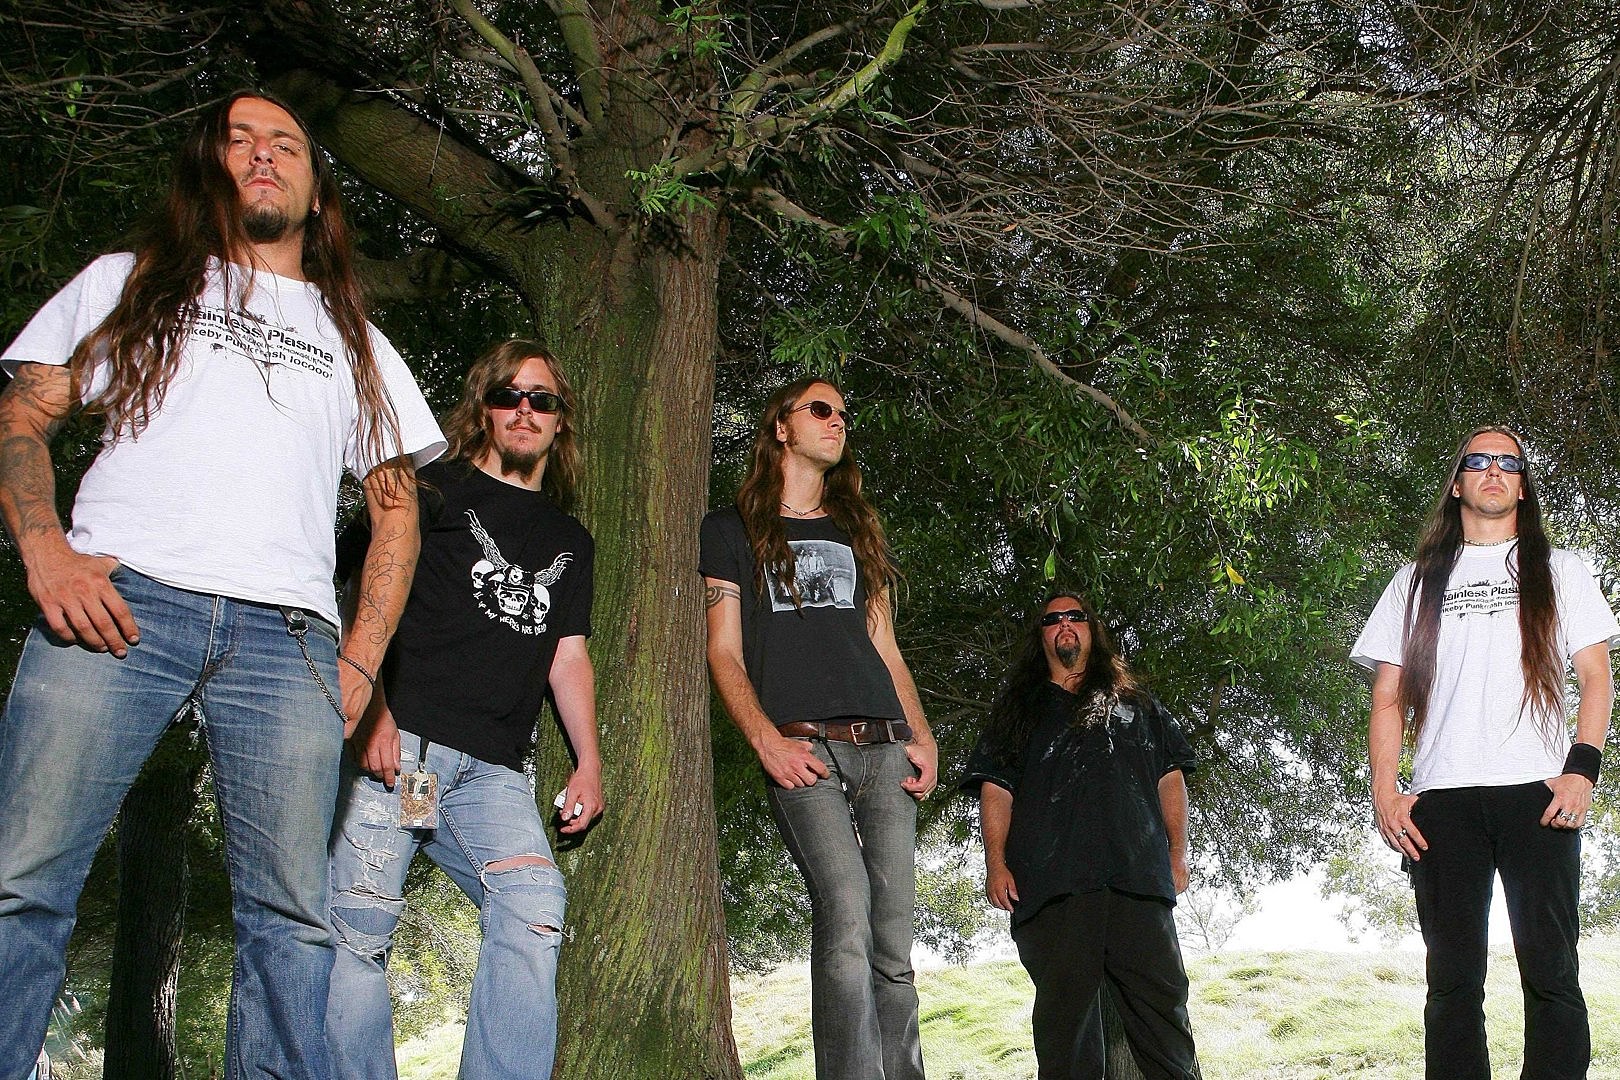 Go Back to 2005 With Orchestral Cover of Opeth’s ‘Atonement’